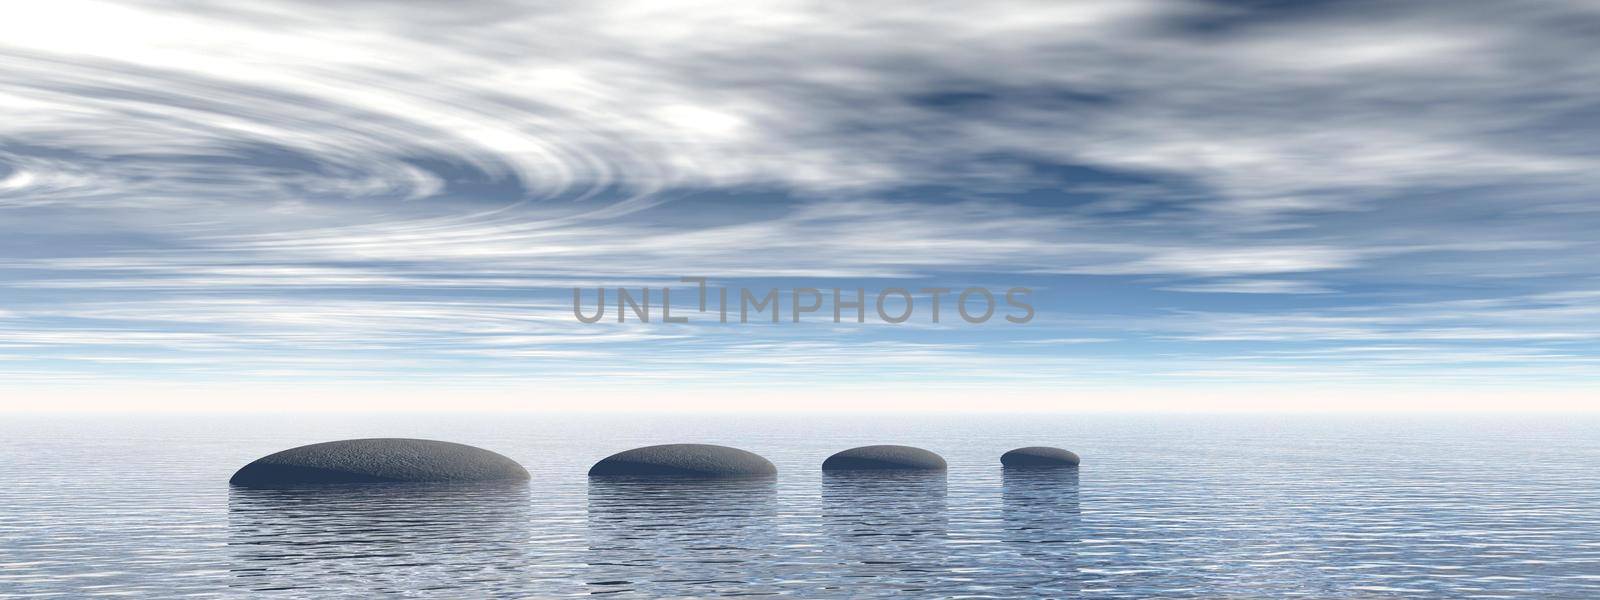 beautiful meditation landscape on the ocean - 3d rendering by mariephotos